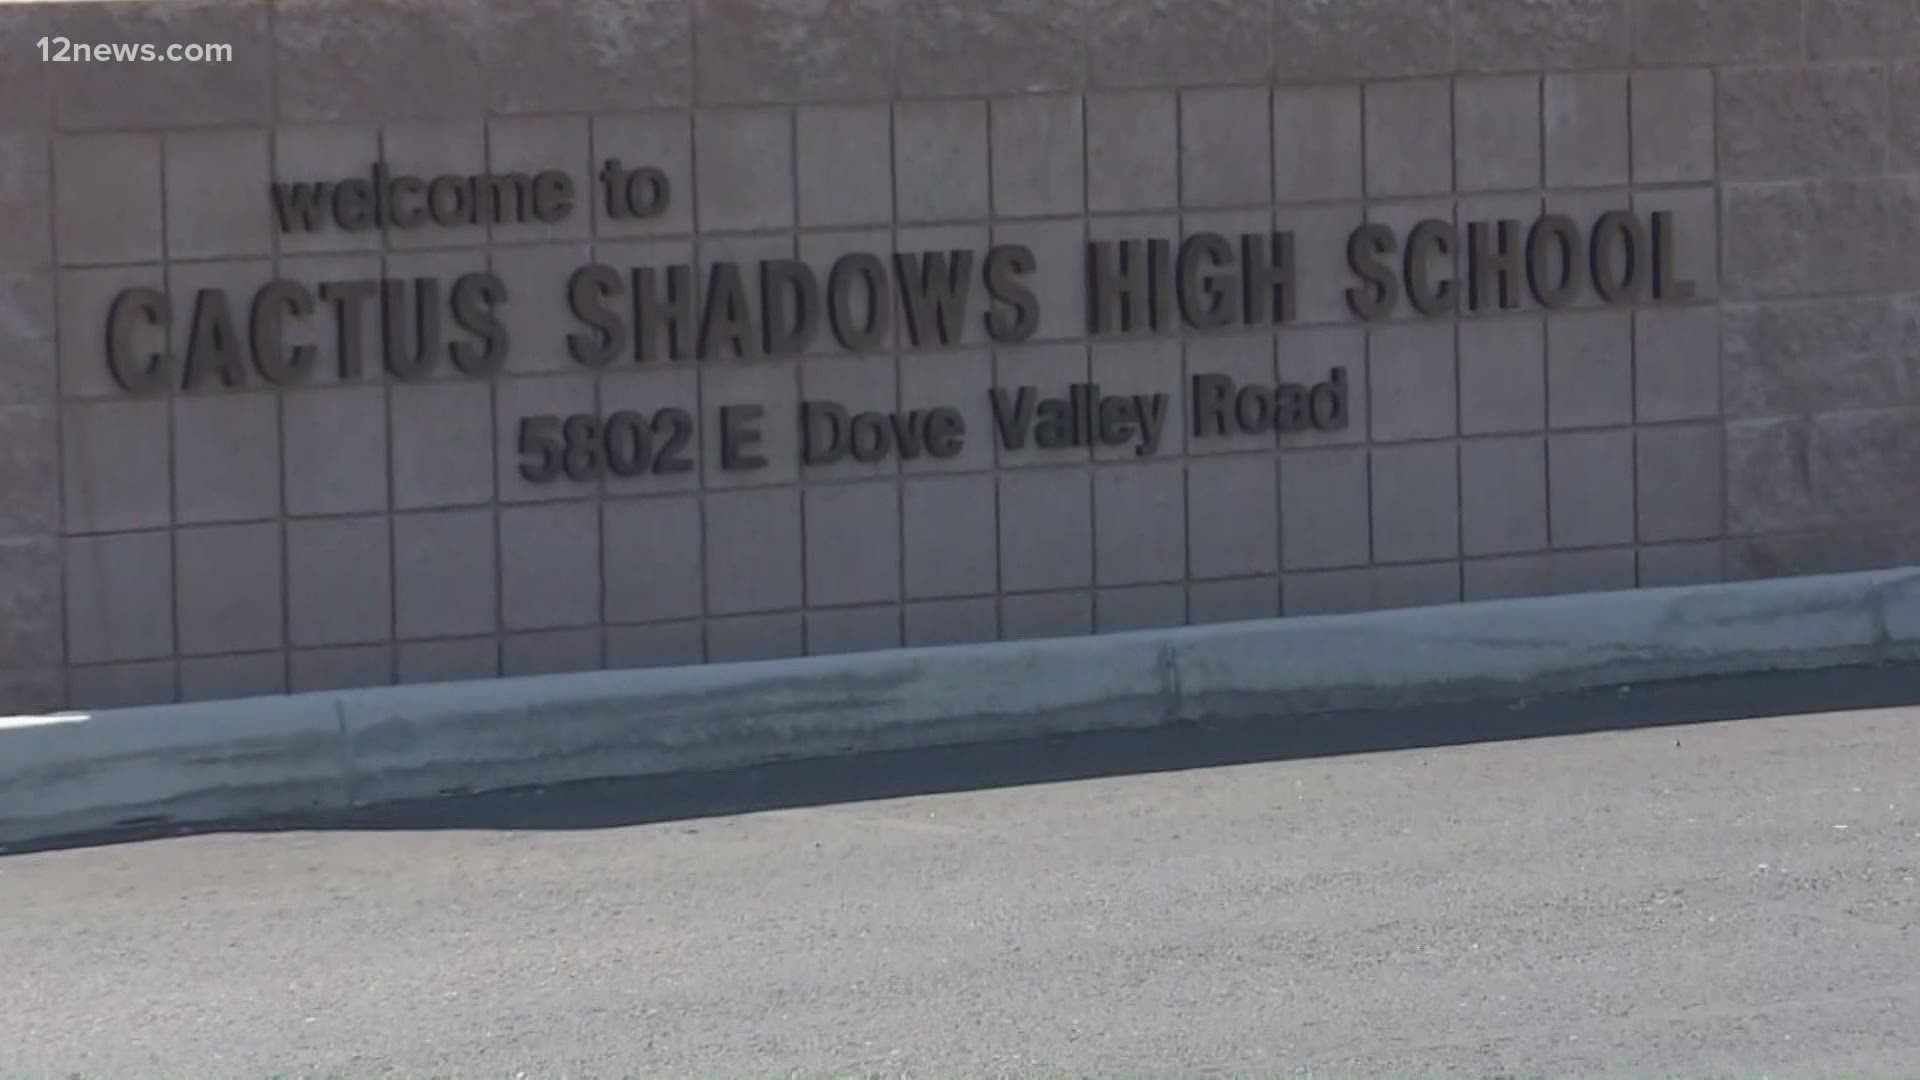 Cactus Shadows had to delay the start of in-person learning because they didn't have enough teachers in September. Now, 100 students are in quarantine.